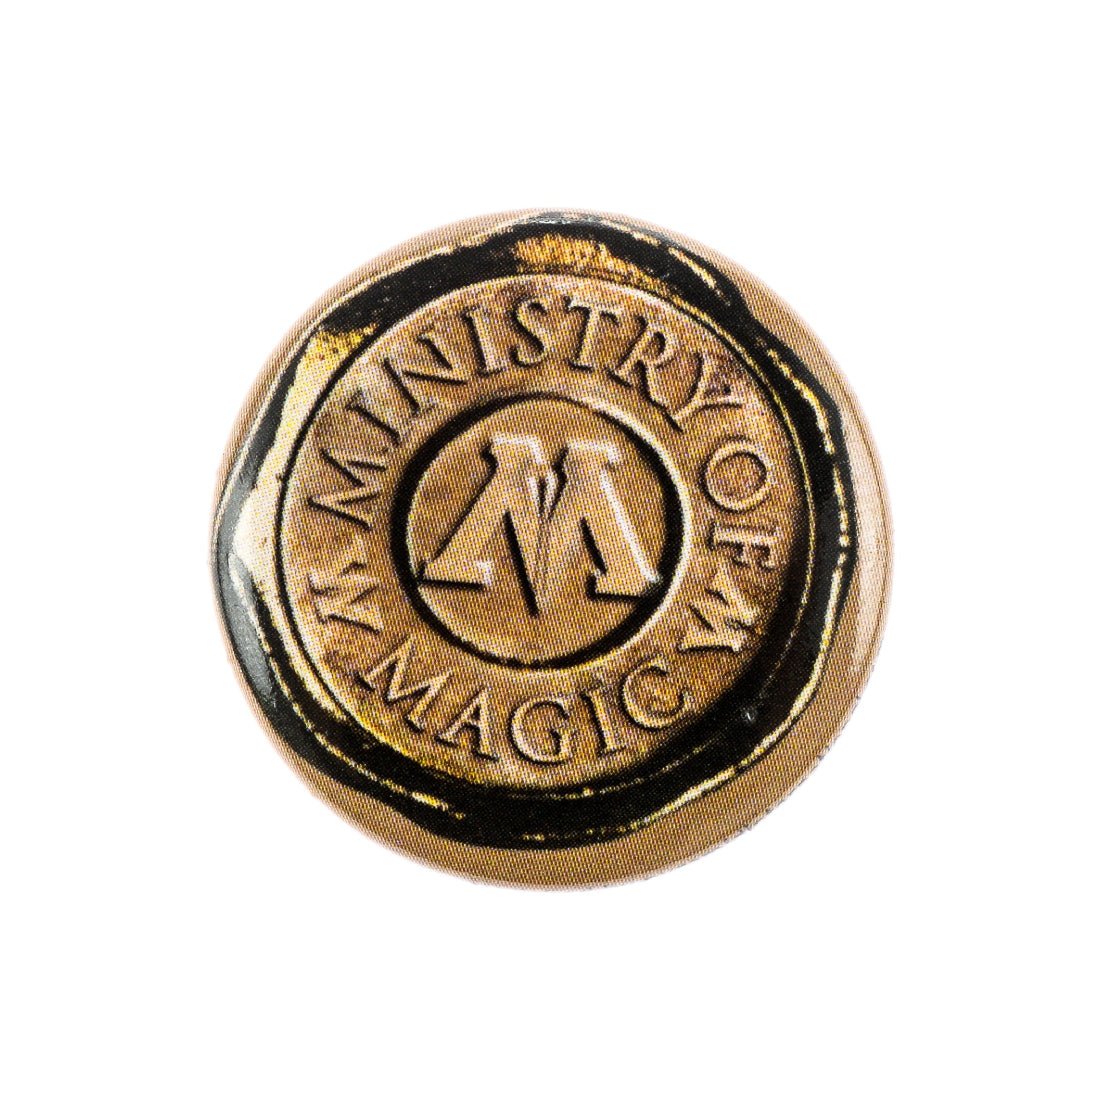 Harry Potter - Ministry Of Magic Seal Button Badge - أكسسوار - Store 974 | ستور ٩٧٤